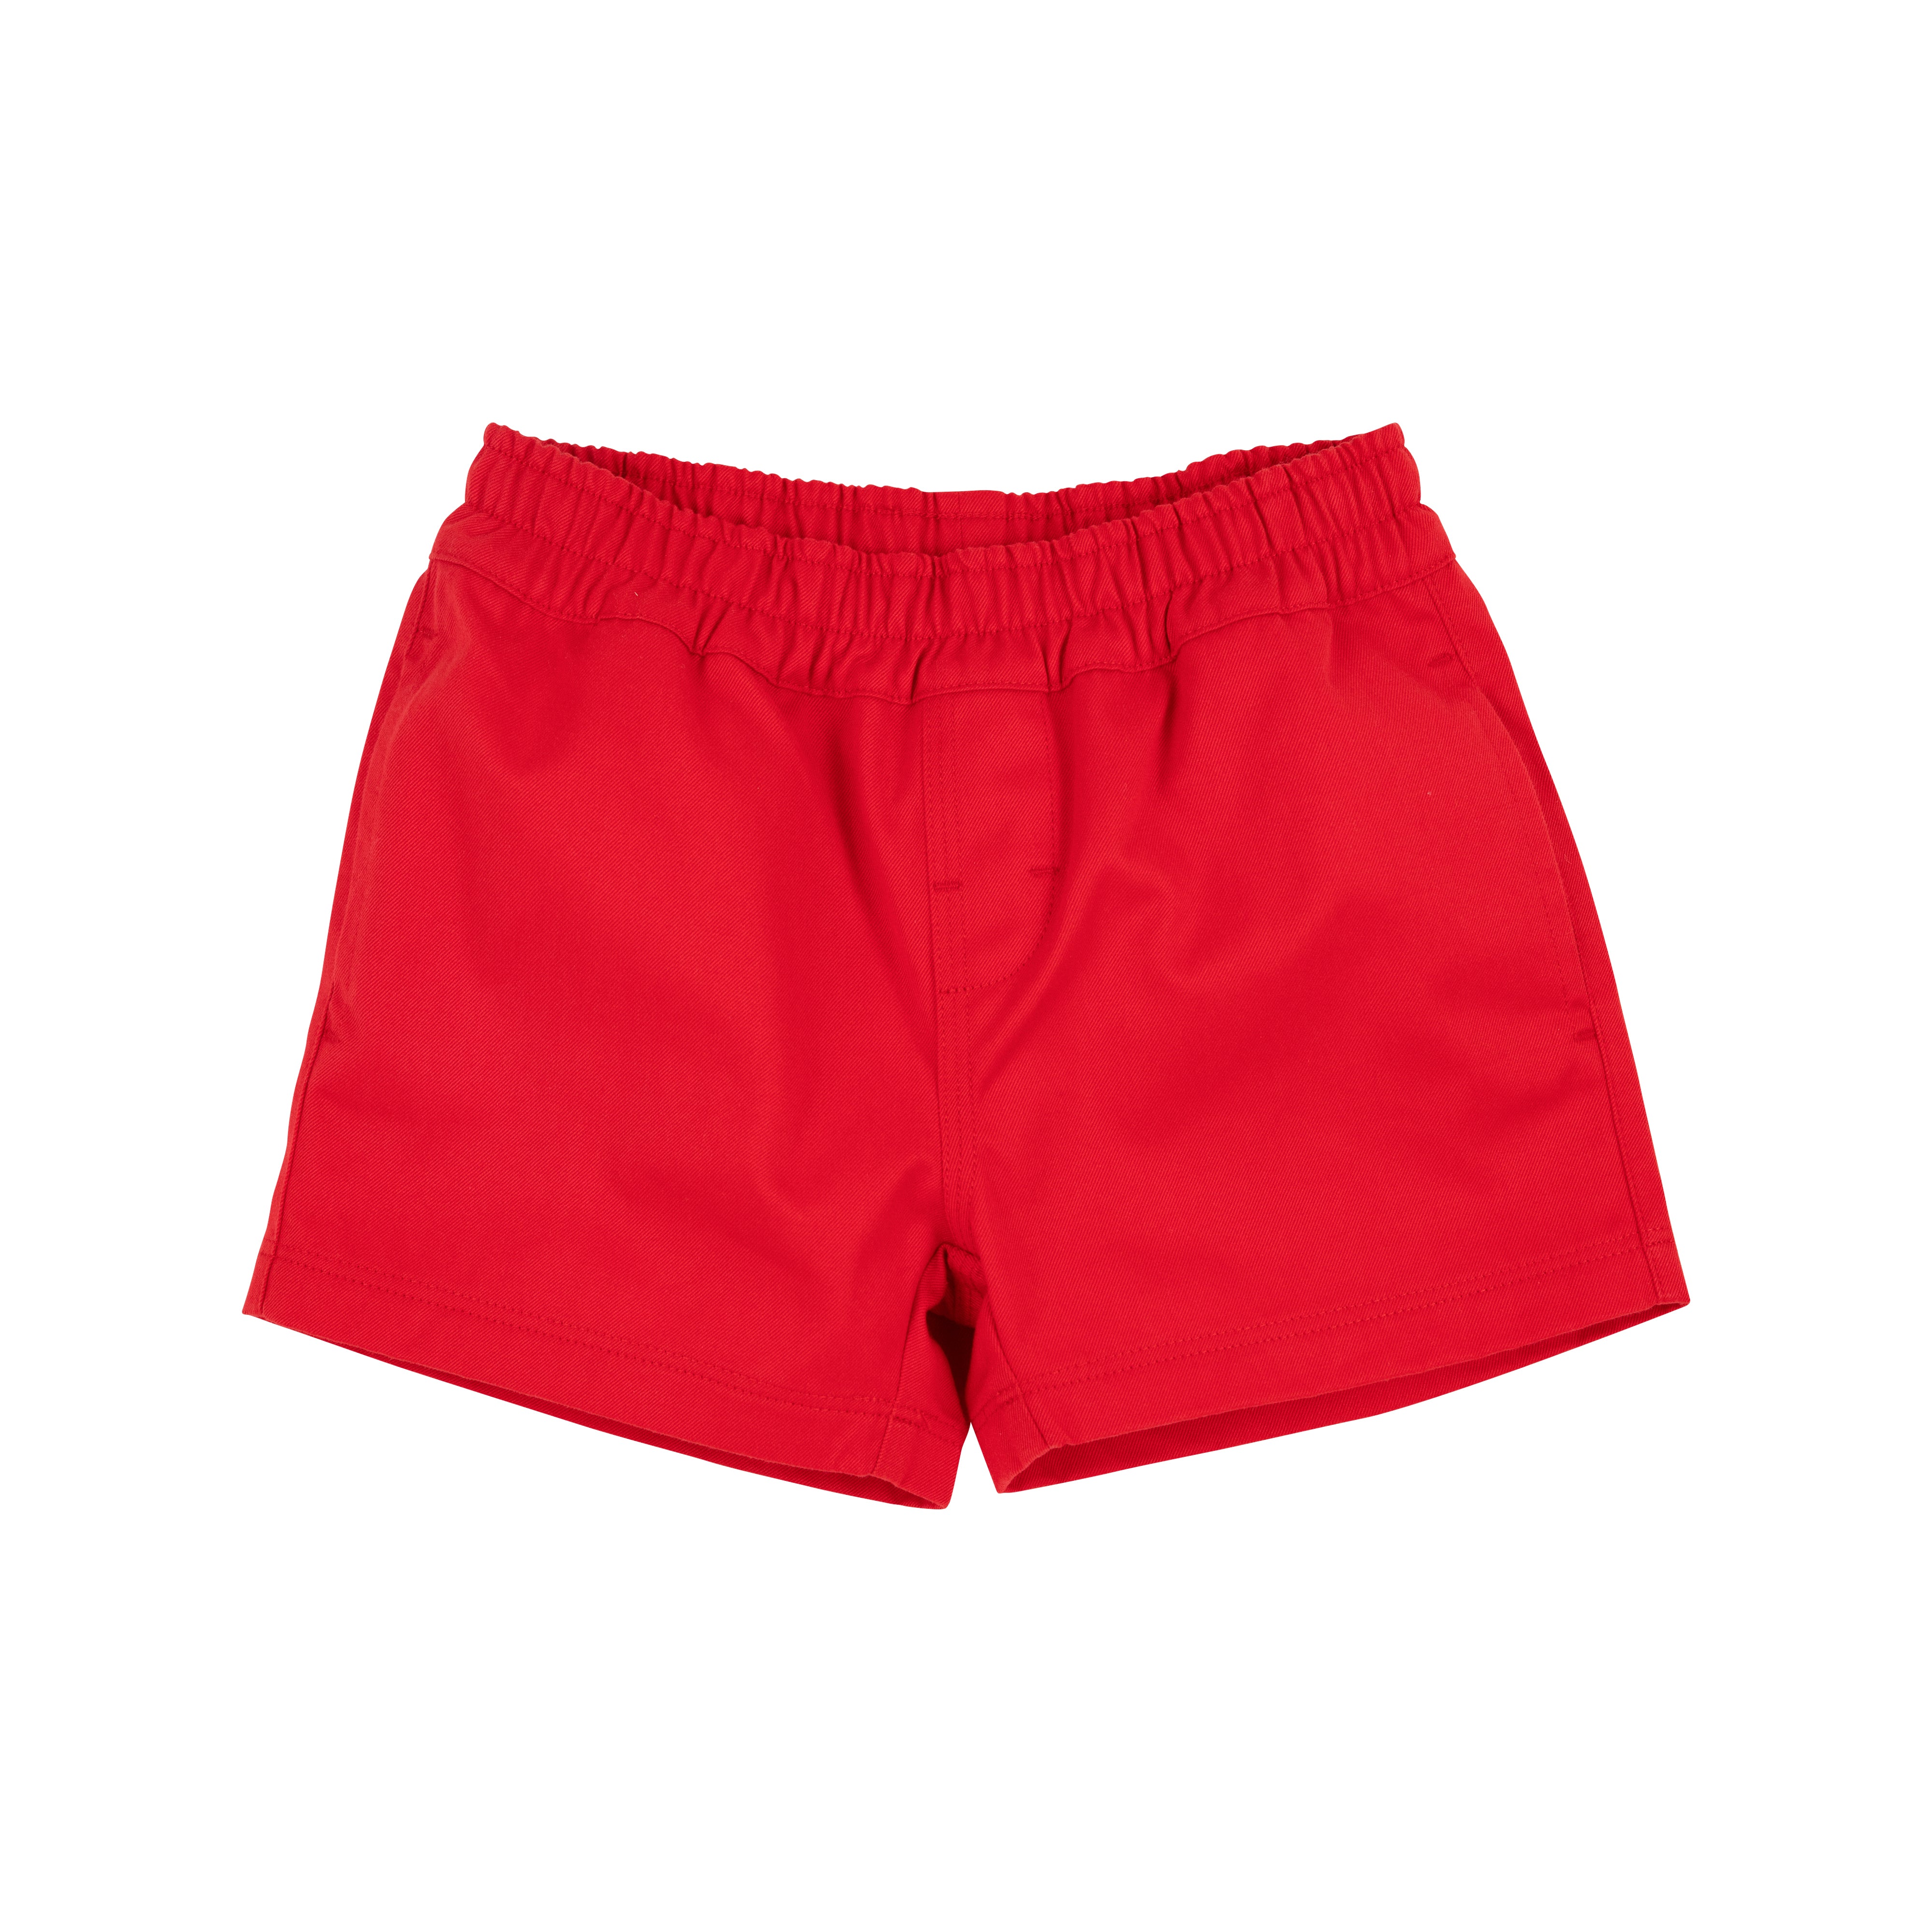 Sheffield Shorts - Richmond Red with Multicolor Stork – The